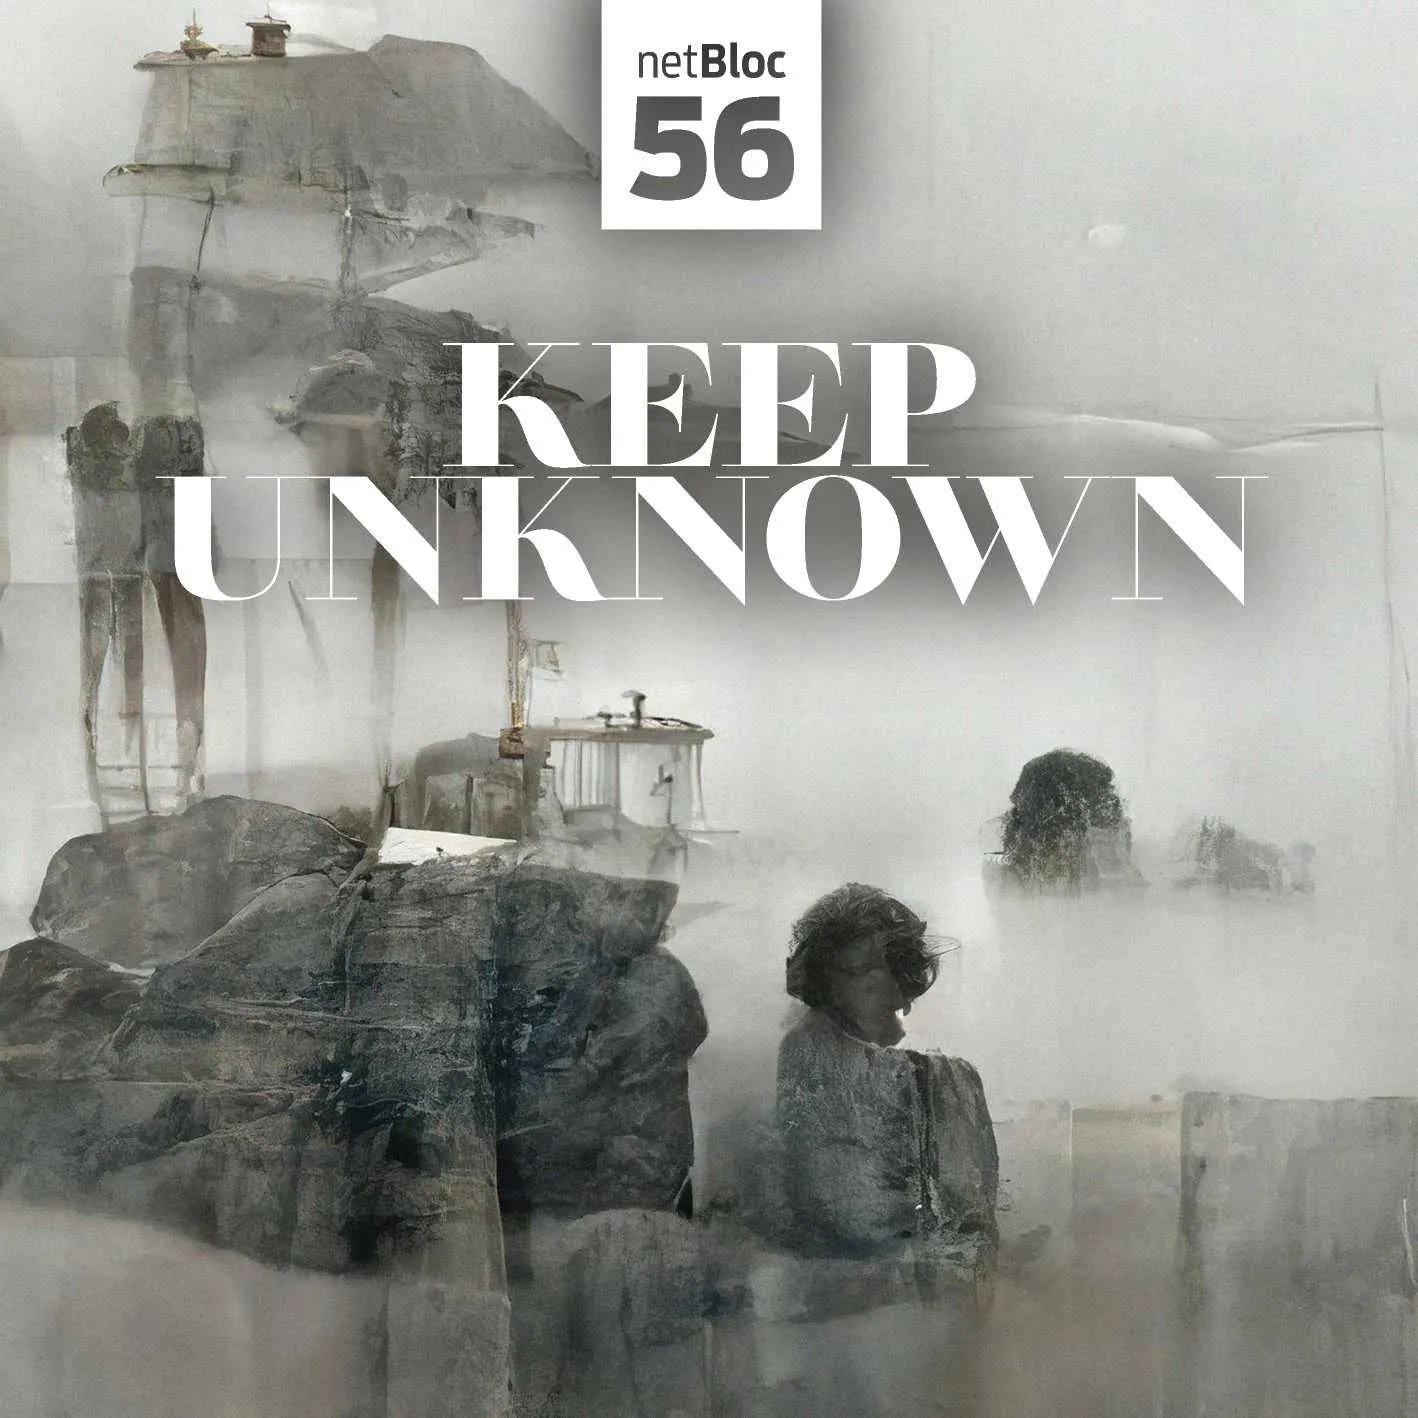 Album cover for “netBloc Vol. 56: Keep Unknown” by Various Artists